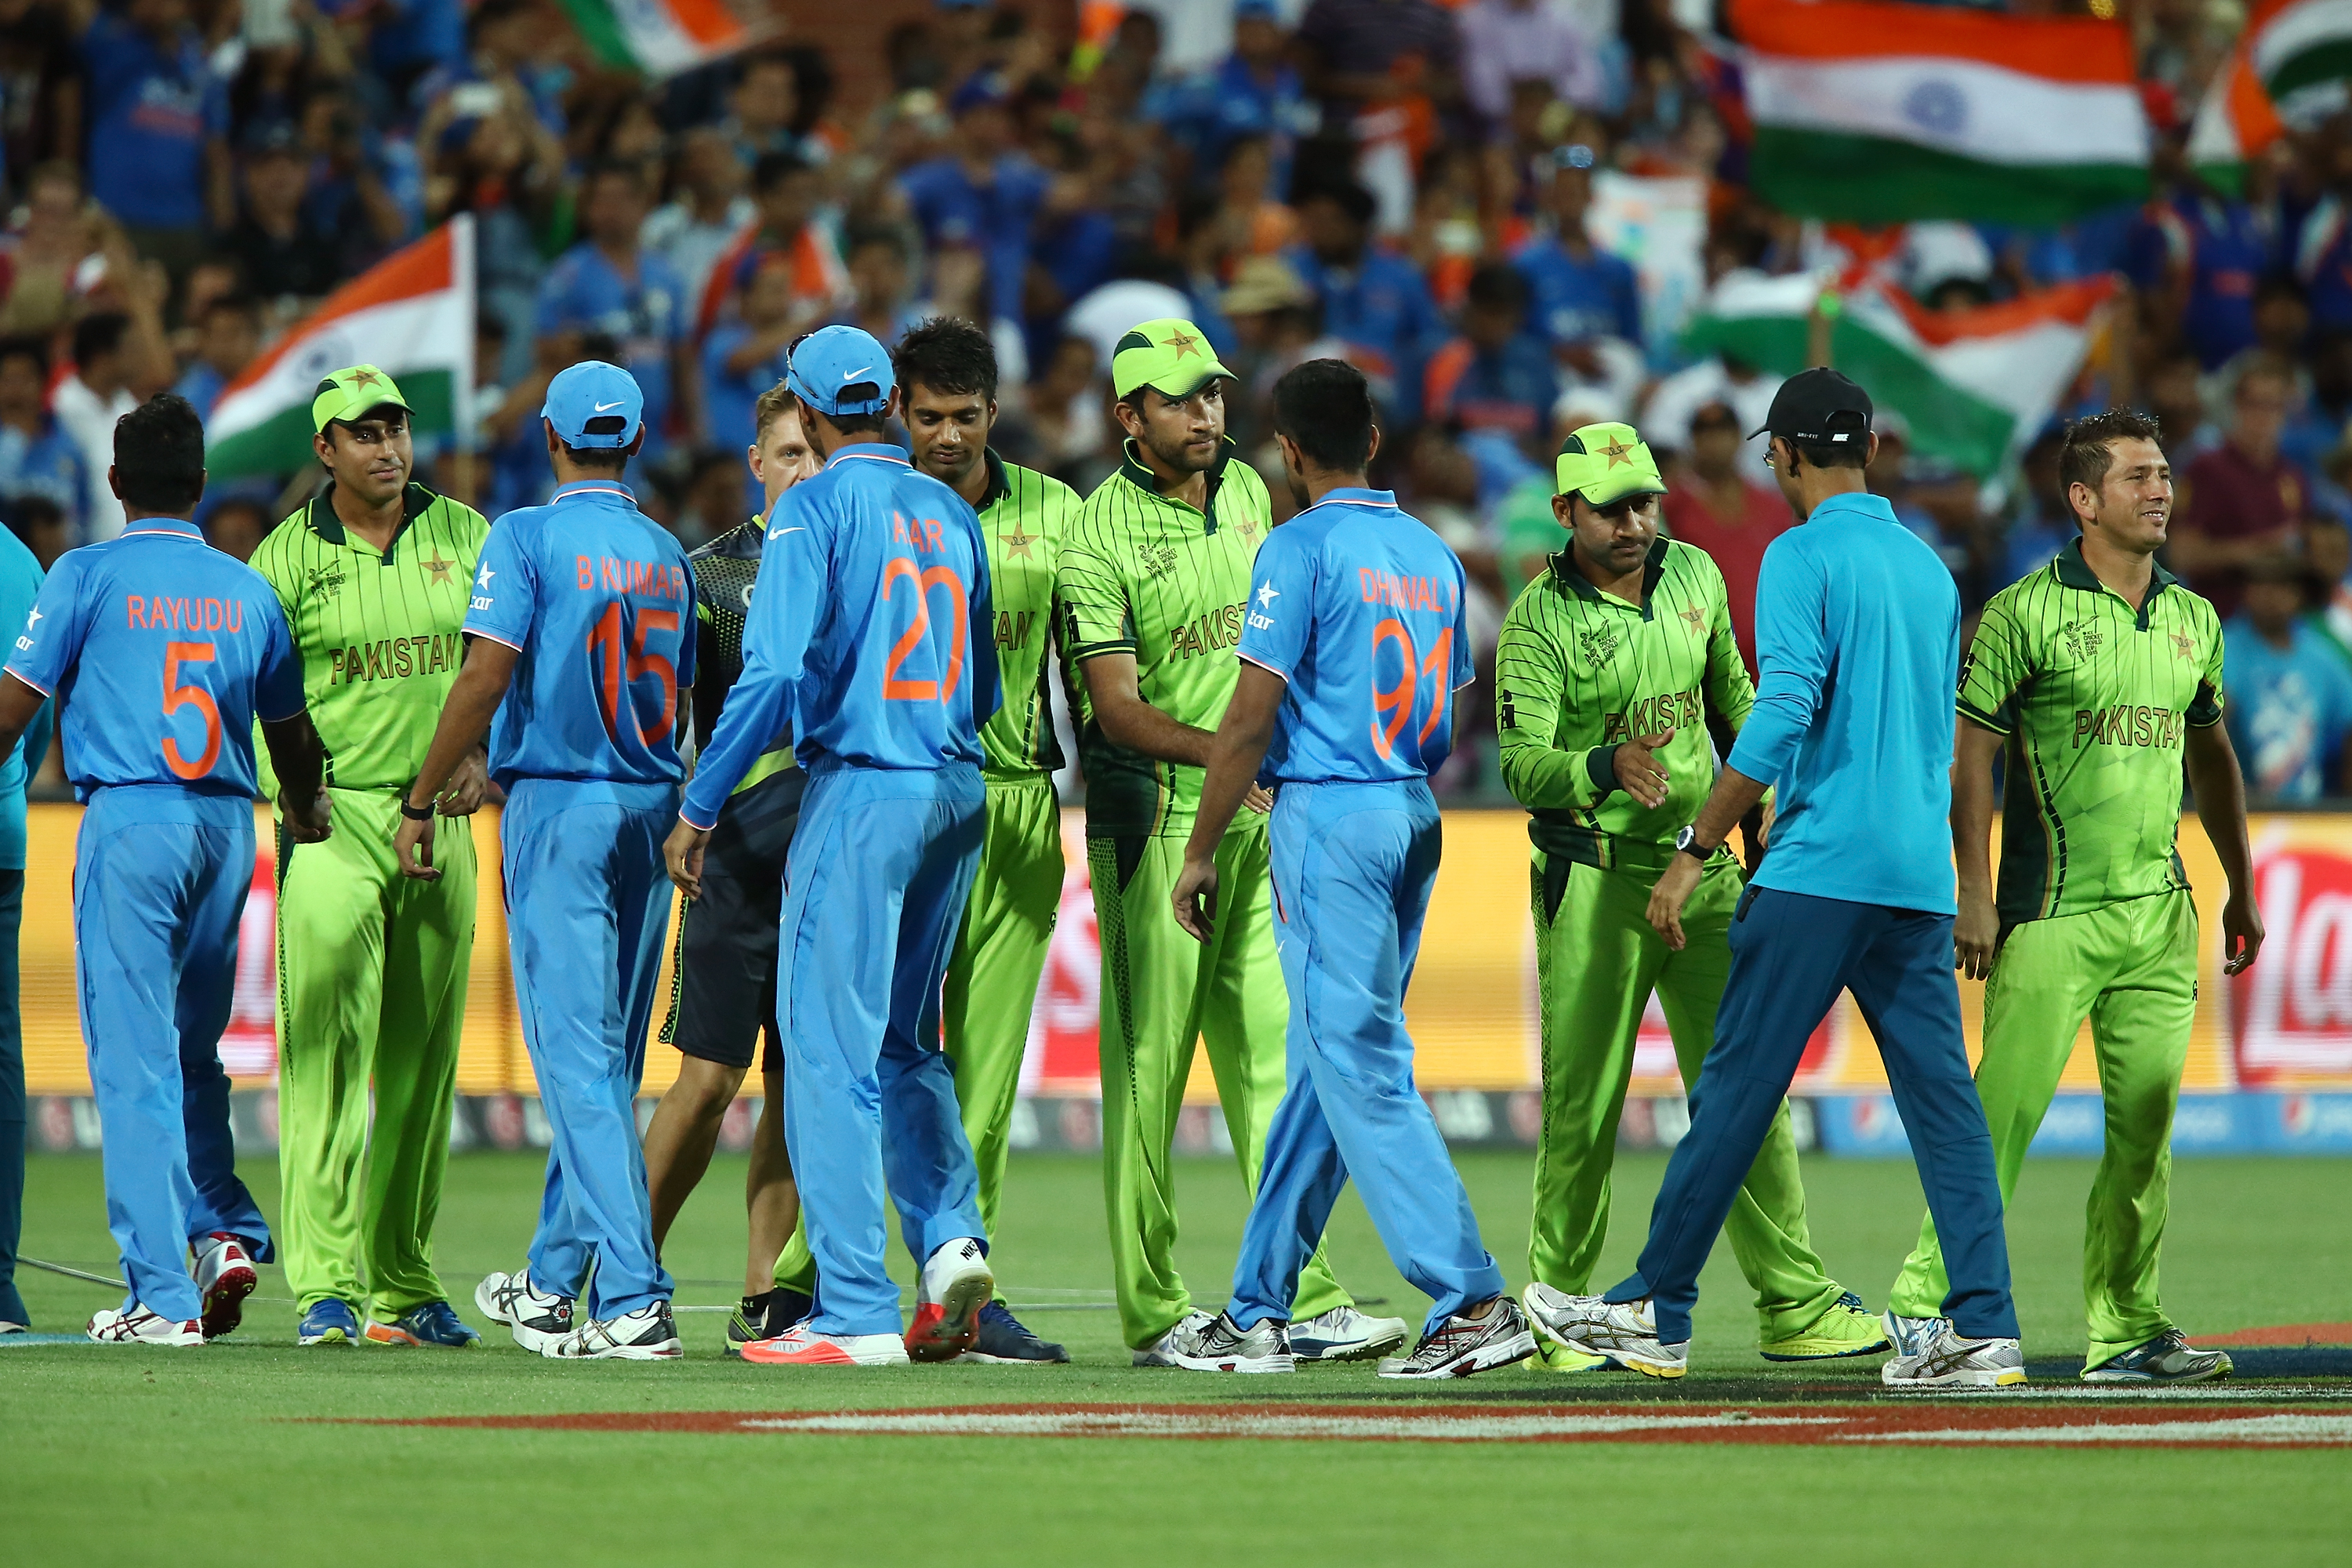 ICC admits fixing draws to put India and Pakistan in same group